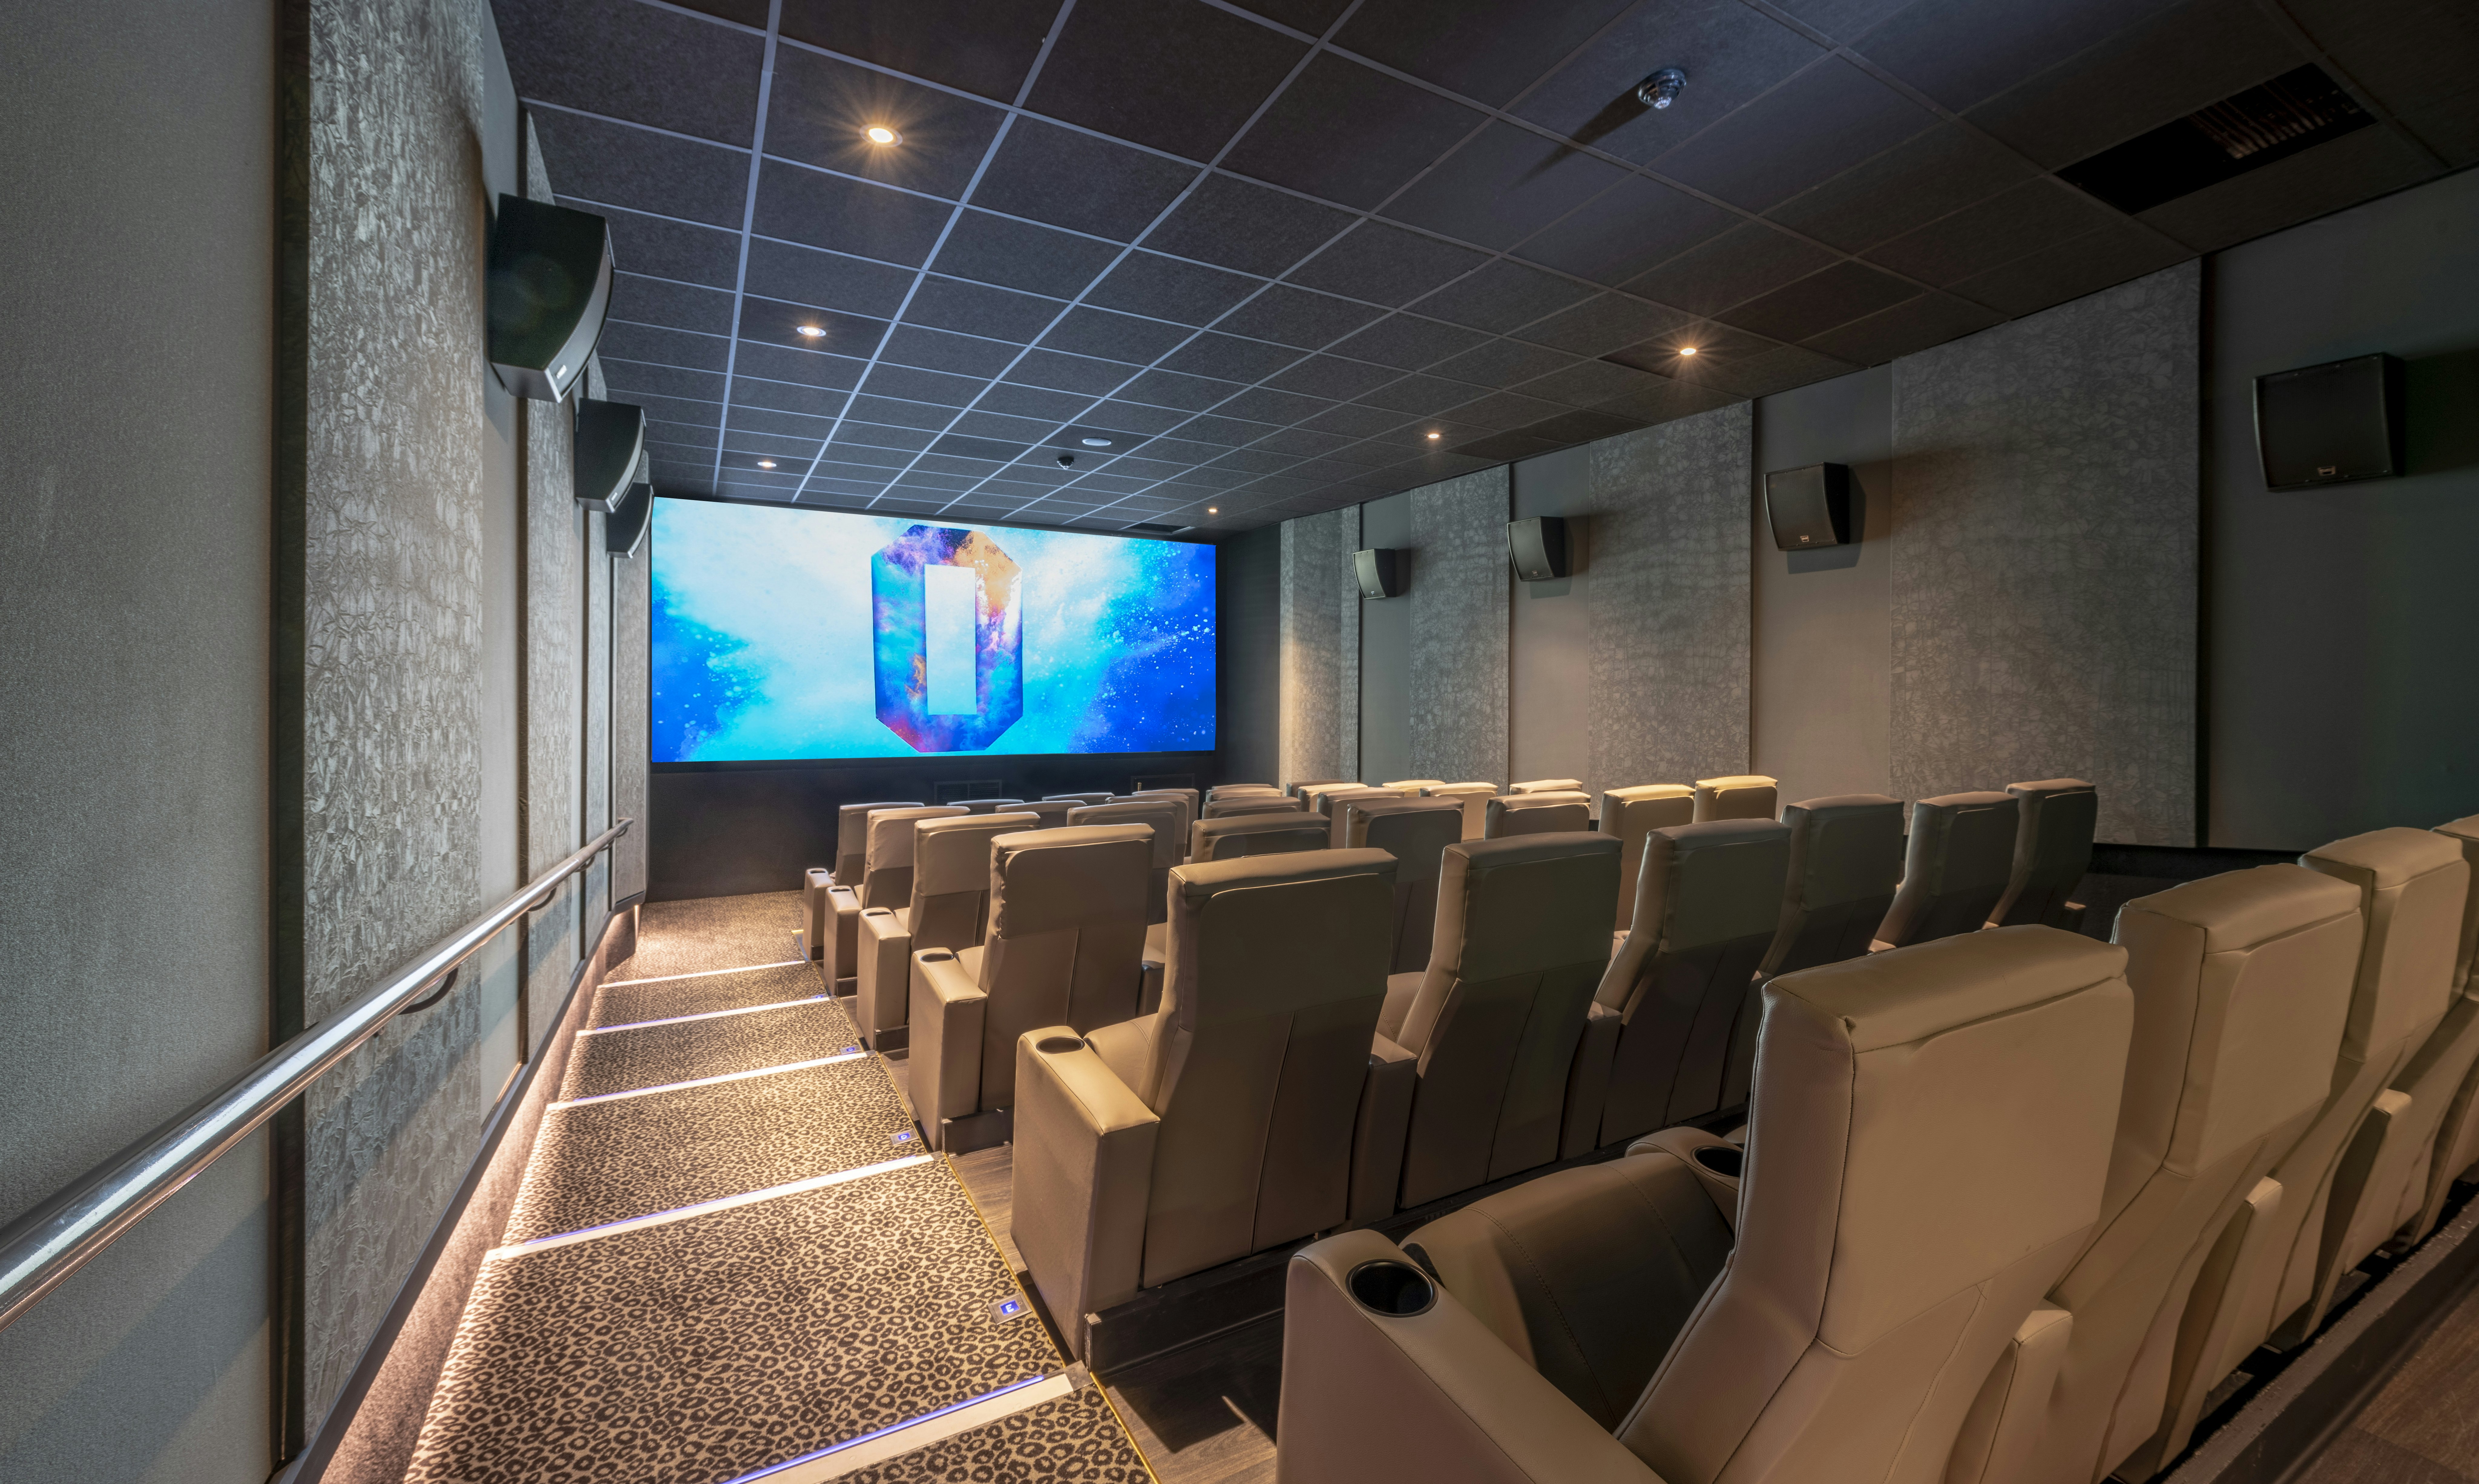 Unique Meeting Rooms Venues in London - ODEON LUXE Leicester Square  